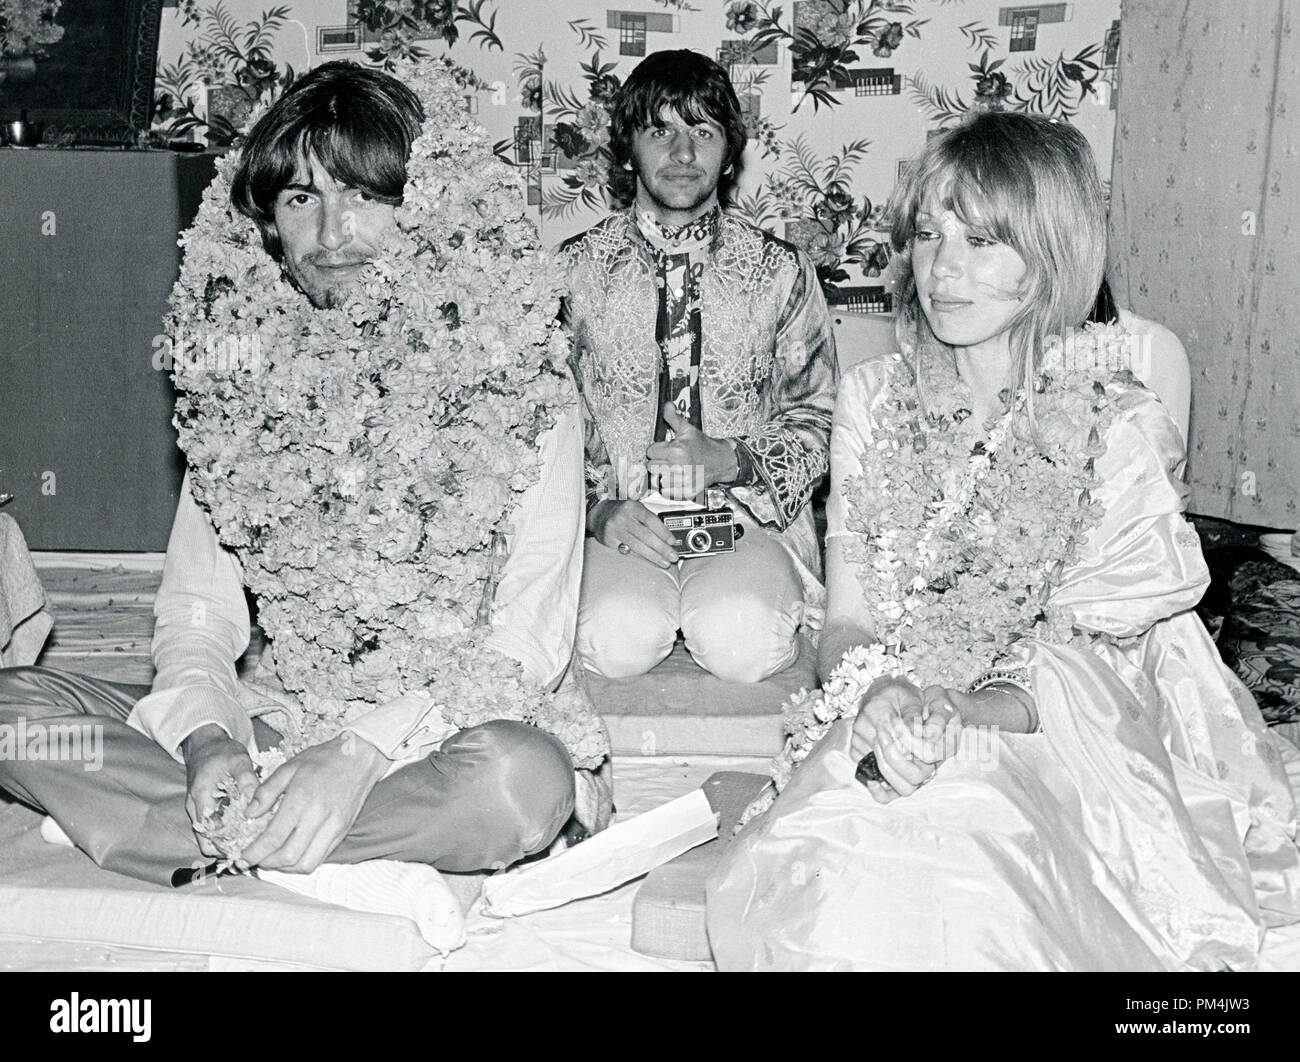 Beatles George Harrison and Ringo Starr along with Pattie Boyd at the Maharishi Mahesh Yogi's ashram in Rishikesh,1968. File Reference #1013 059 THA © JRC /The Hollywood Archive - All Rights Reserved. Stock Photo